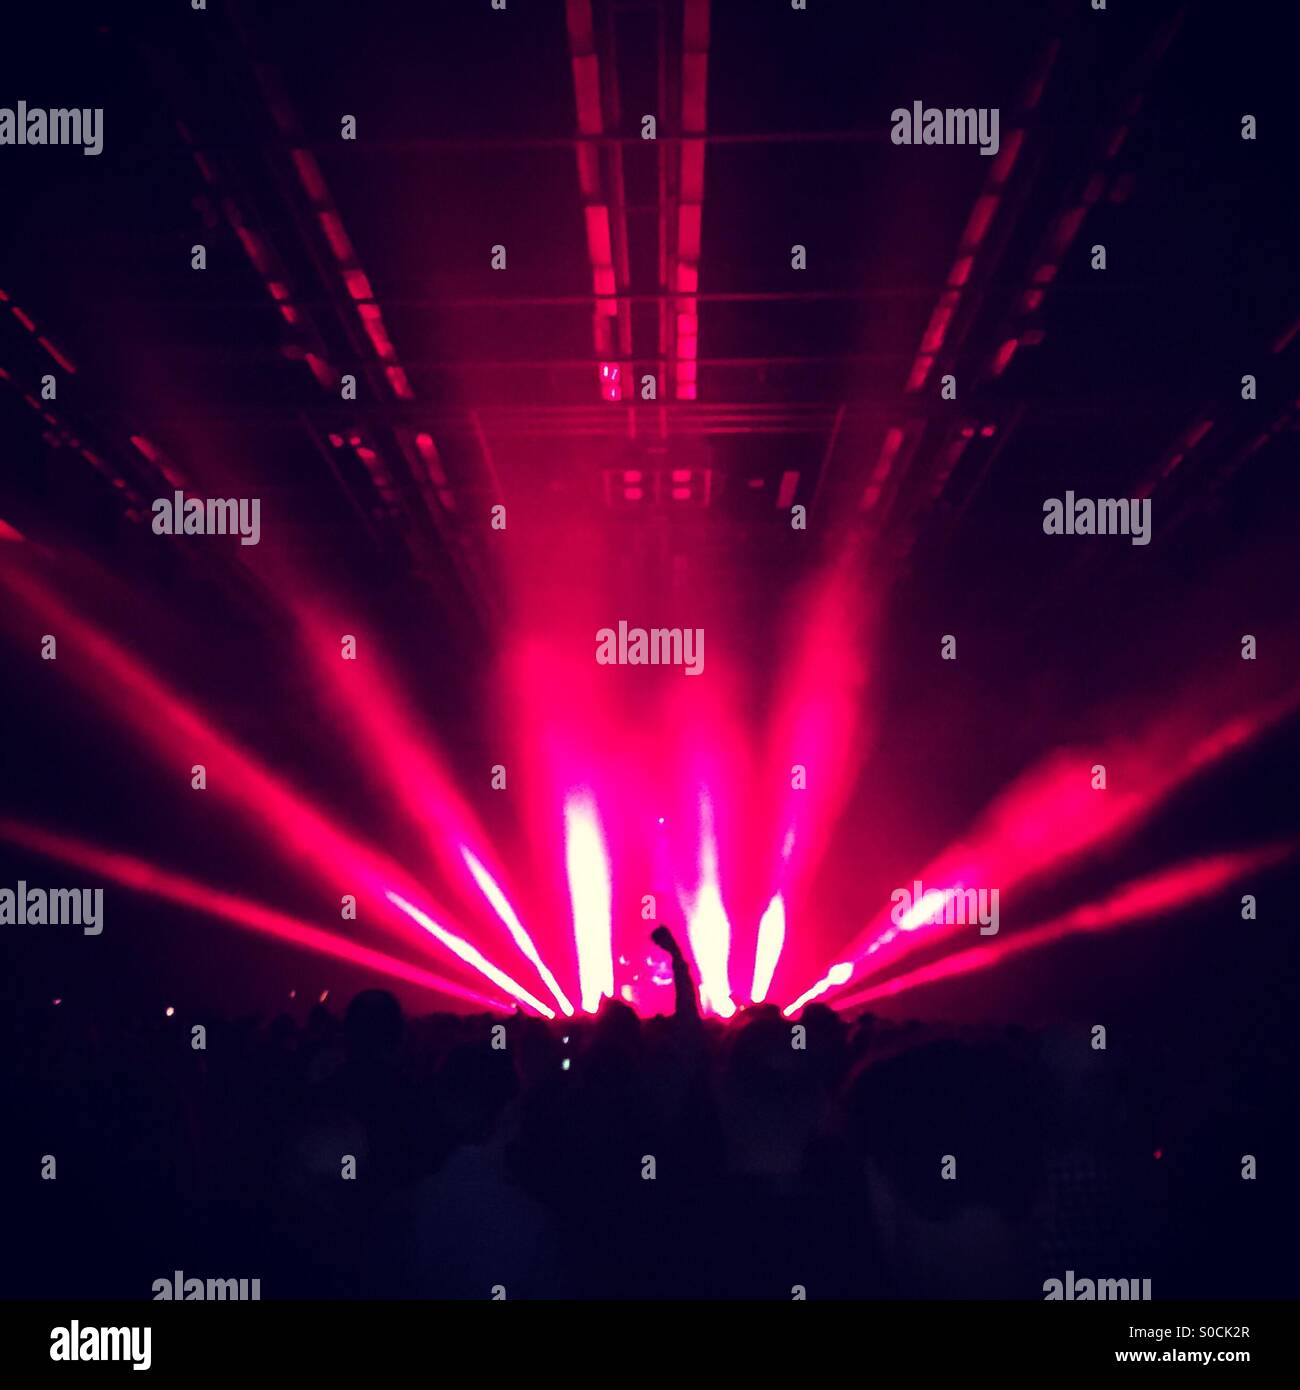 Pink laser light show at a music concert Stock Photo